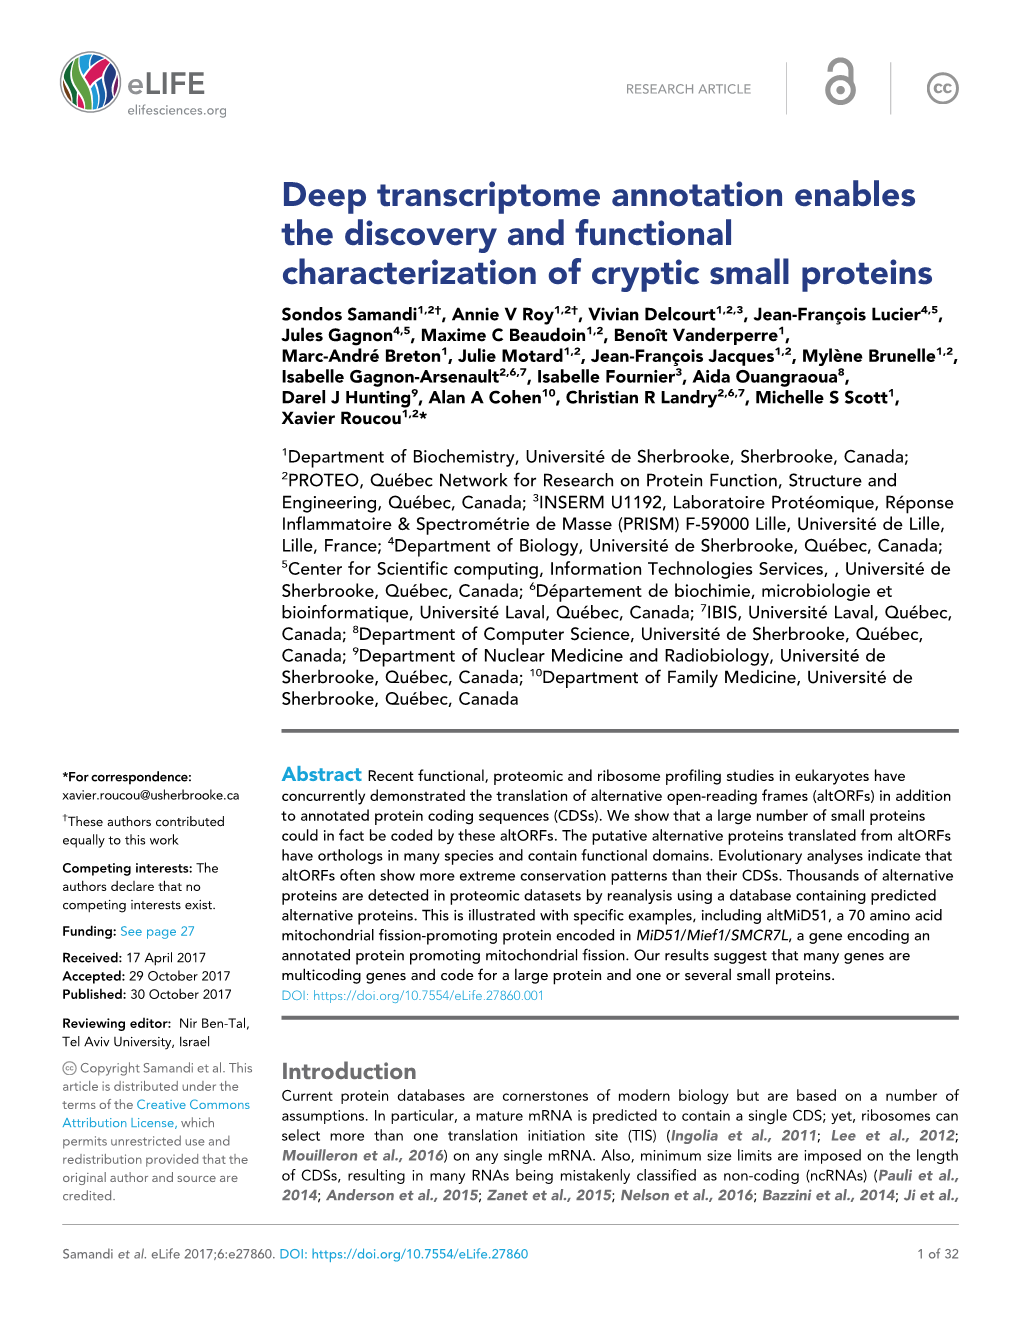 Deep Transcriptome Annotation Enables the Discovery And